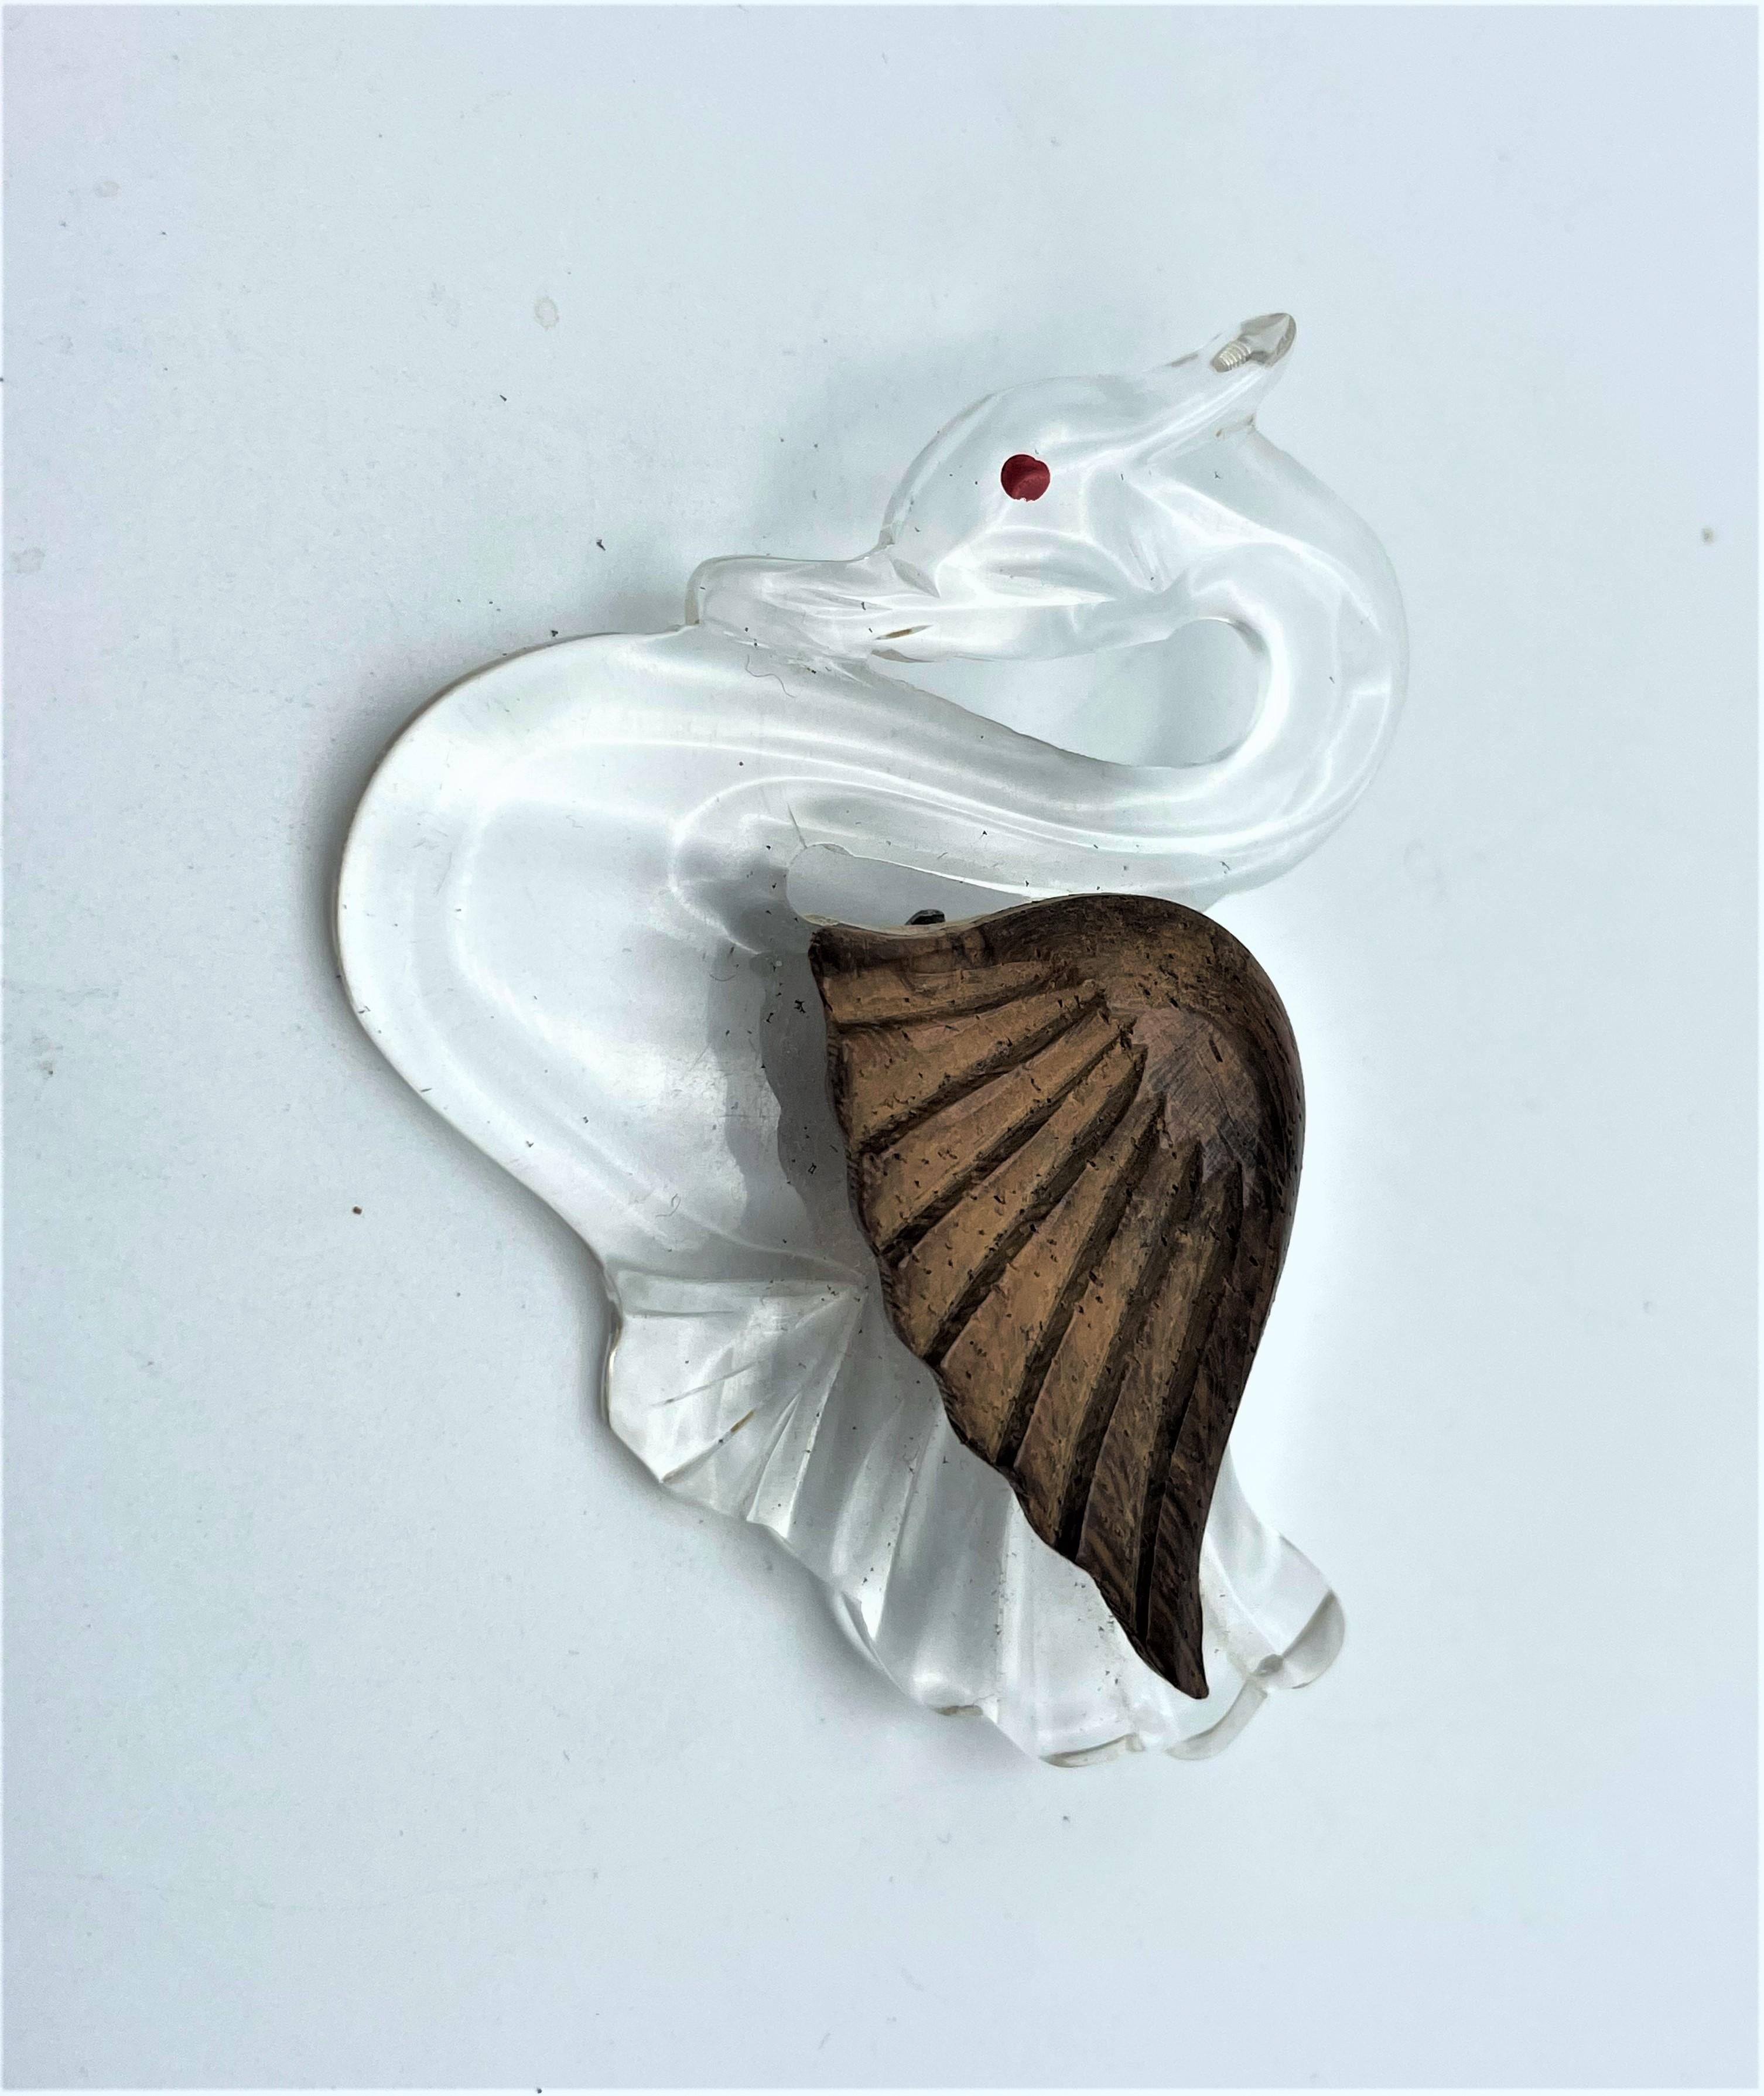 Cleary wonderful  brooch in the shape of a swan made of clear Lucite/Acrylic. The brown swings are made of carved wood.  Window glass/acrylic from the aircraft was used for this type of jewelry in the 1940s USA. Non was marked by a